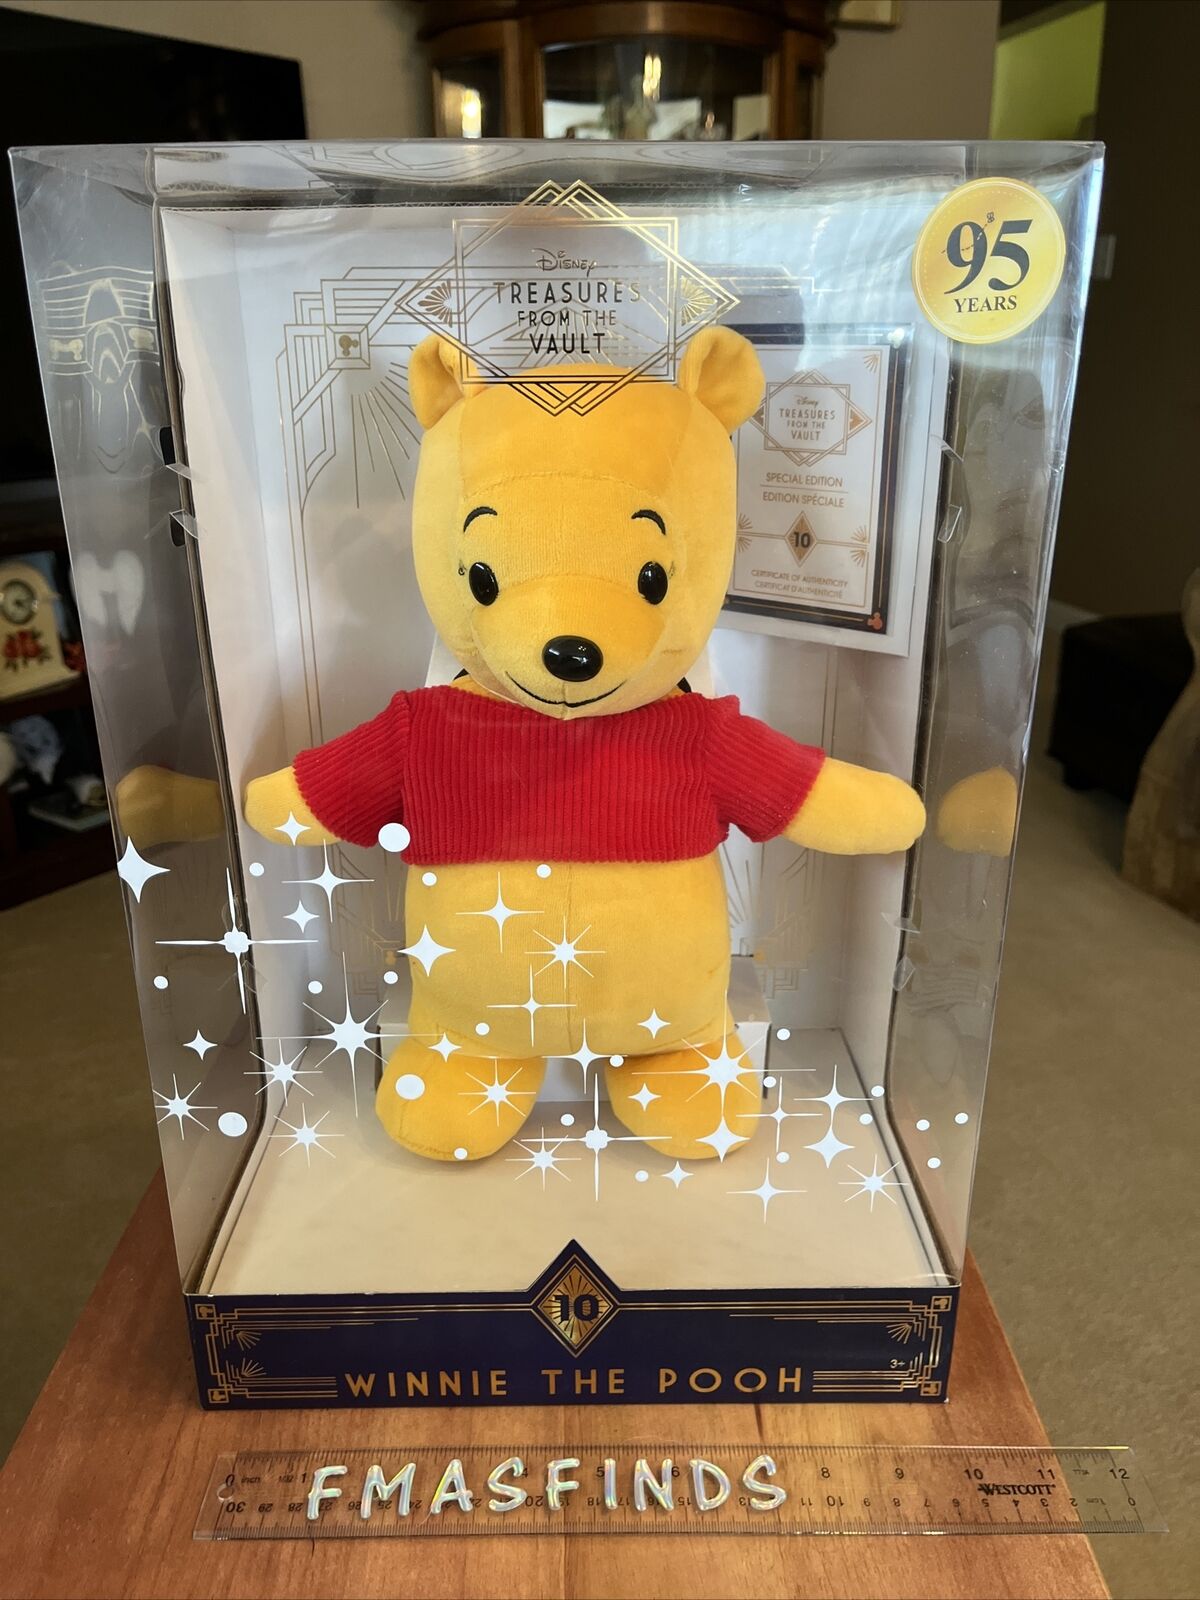 WINNIE THE POOH Disney Treasures From the Vault Limited Edition Plush NEW IN BOX